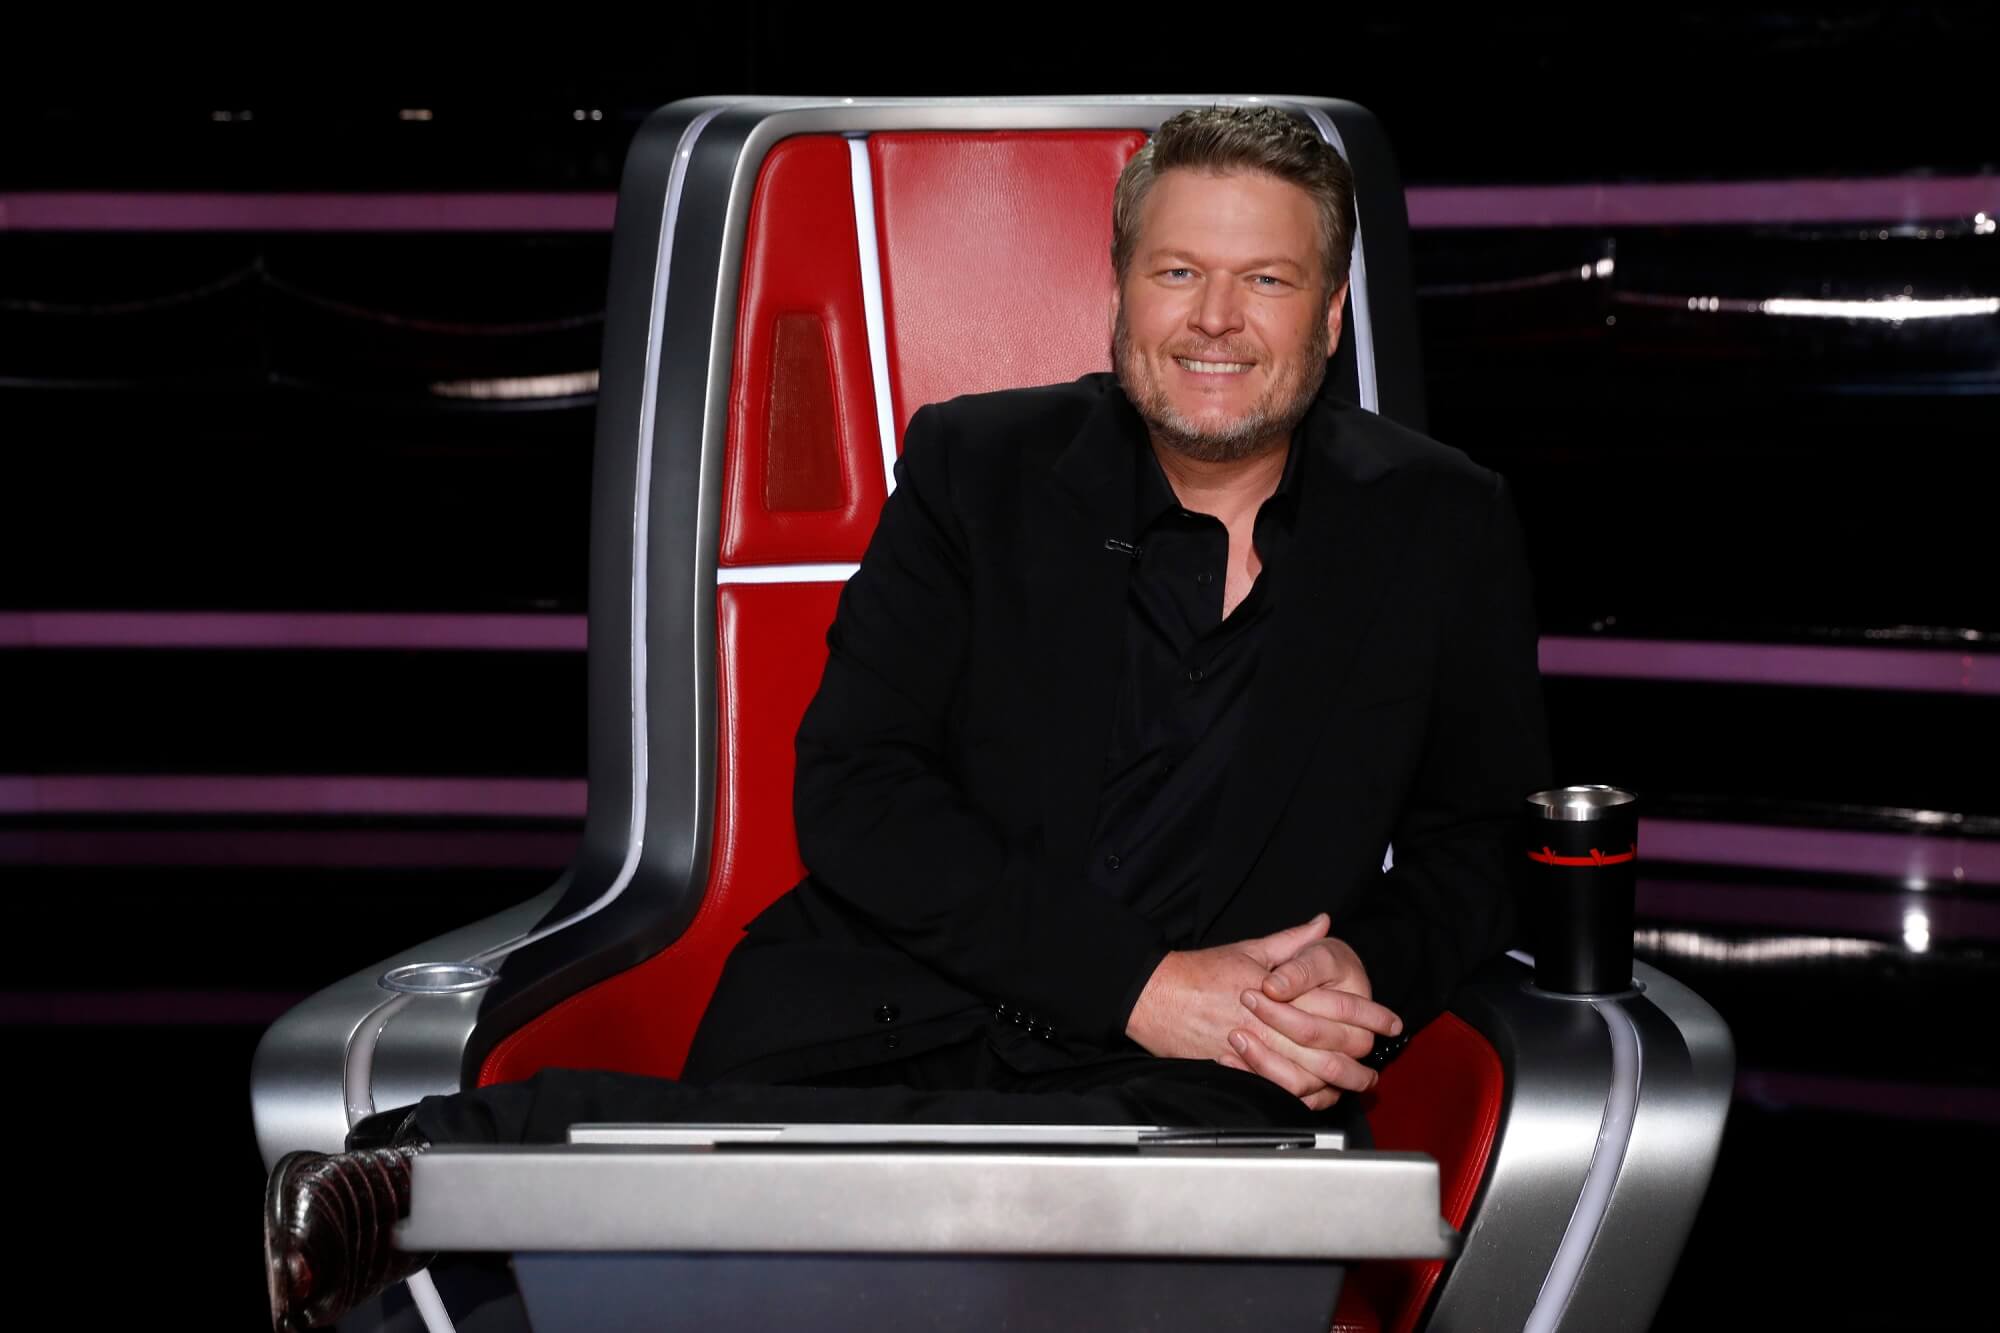 Blake Shelton Did Not Cry Filming Season 23 Auditions of ‘The Voice’ Because He’s ‘a Man’